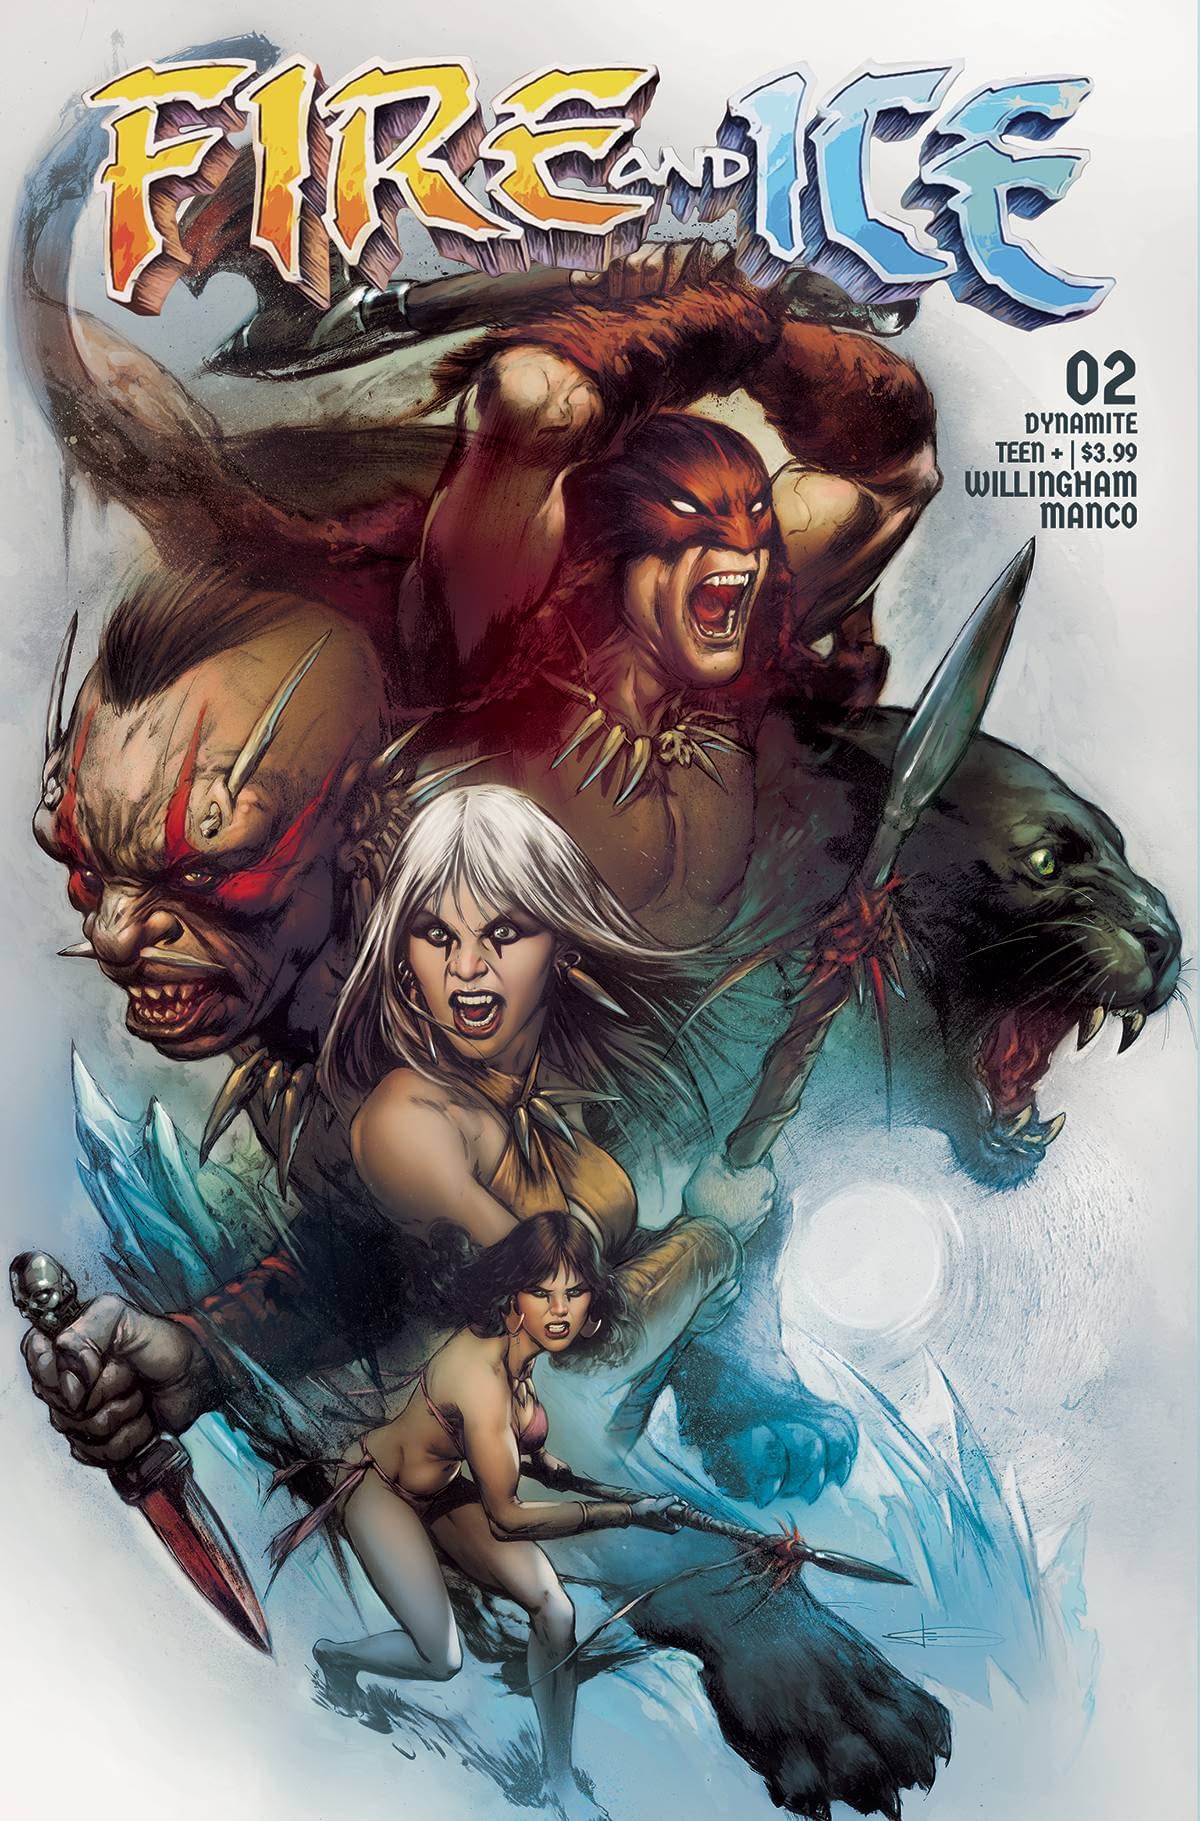 Cover image for FIRE AND ICE #2 CVR B MANCO